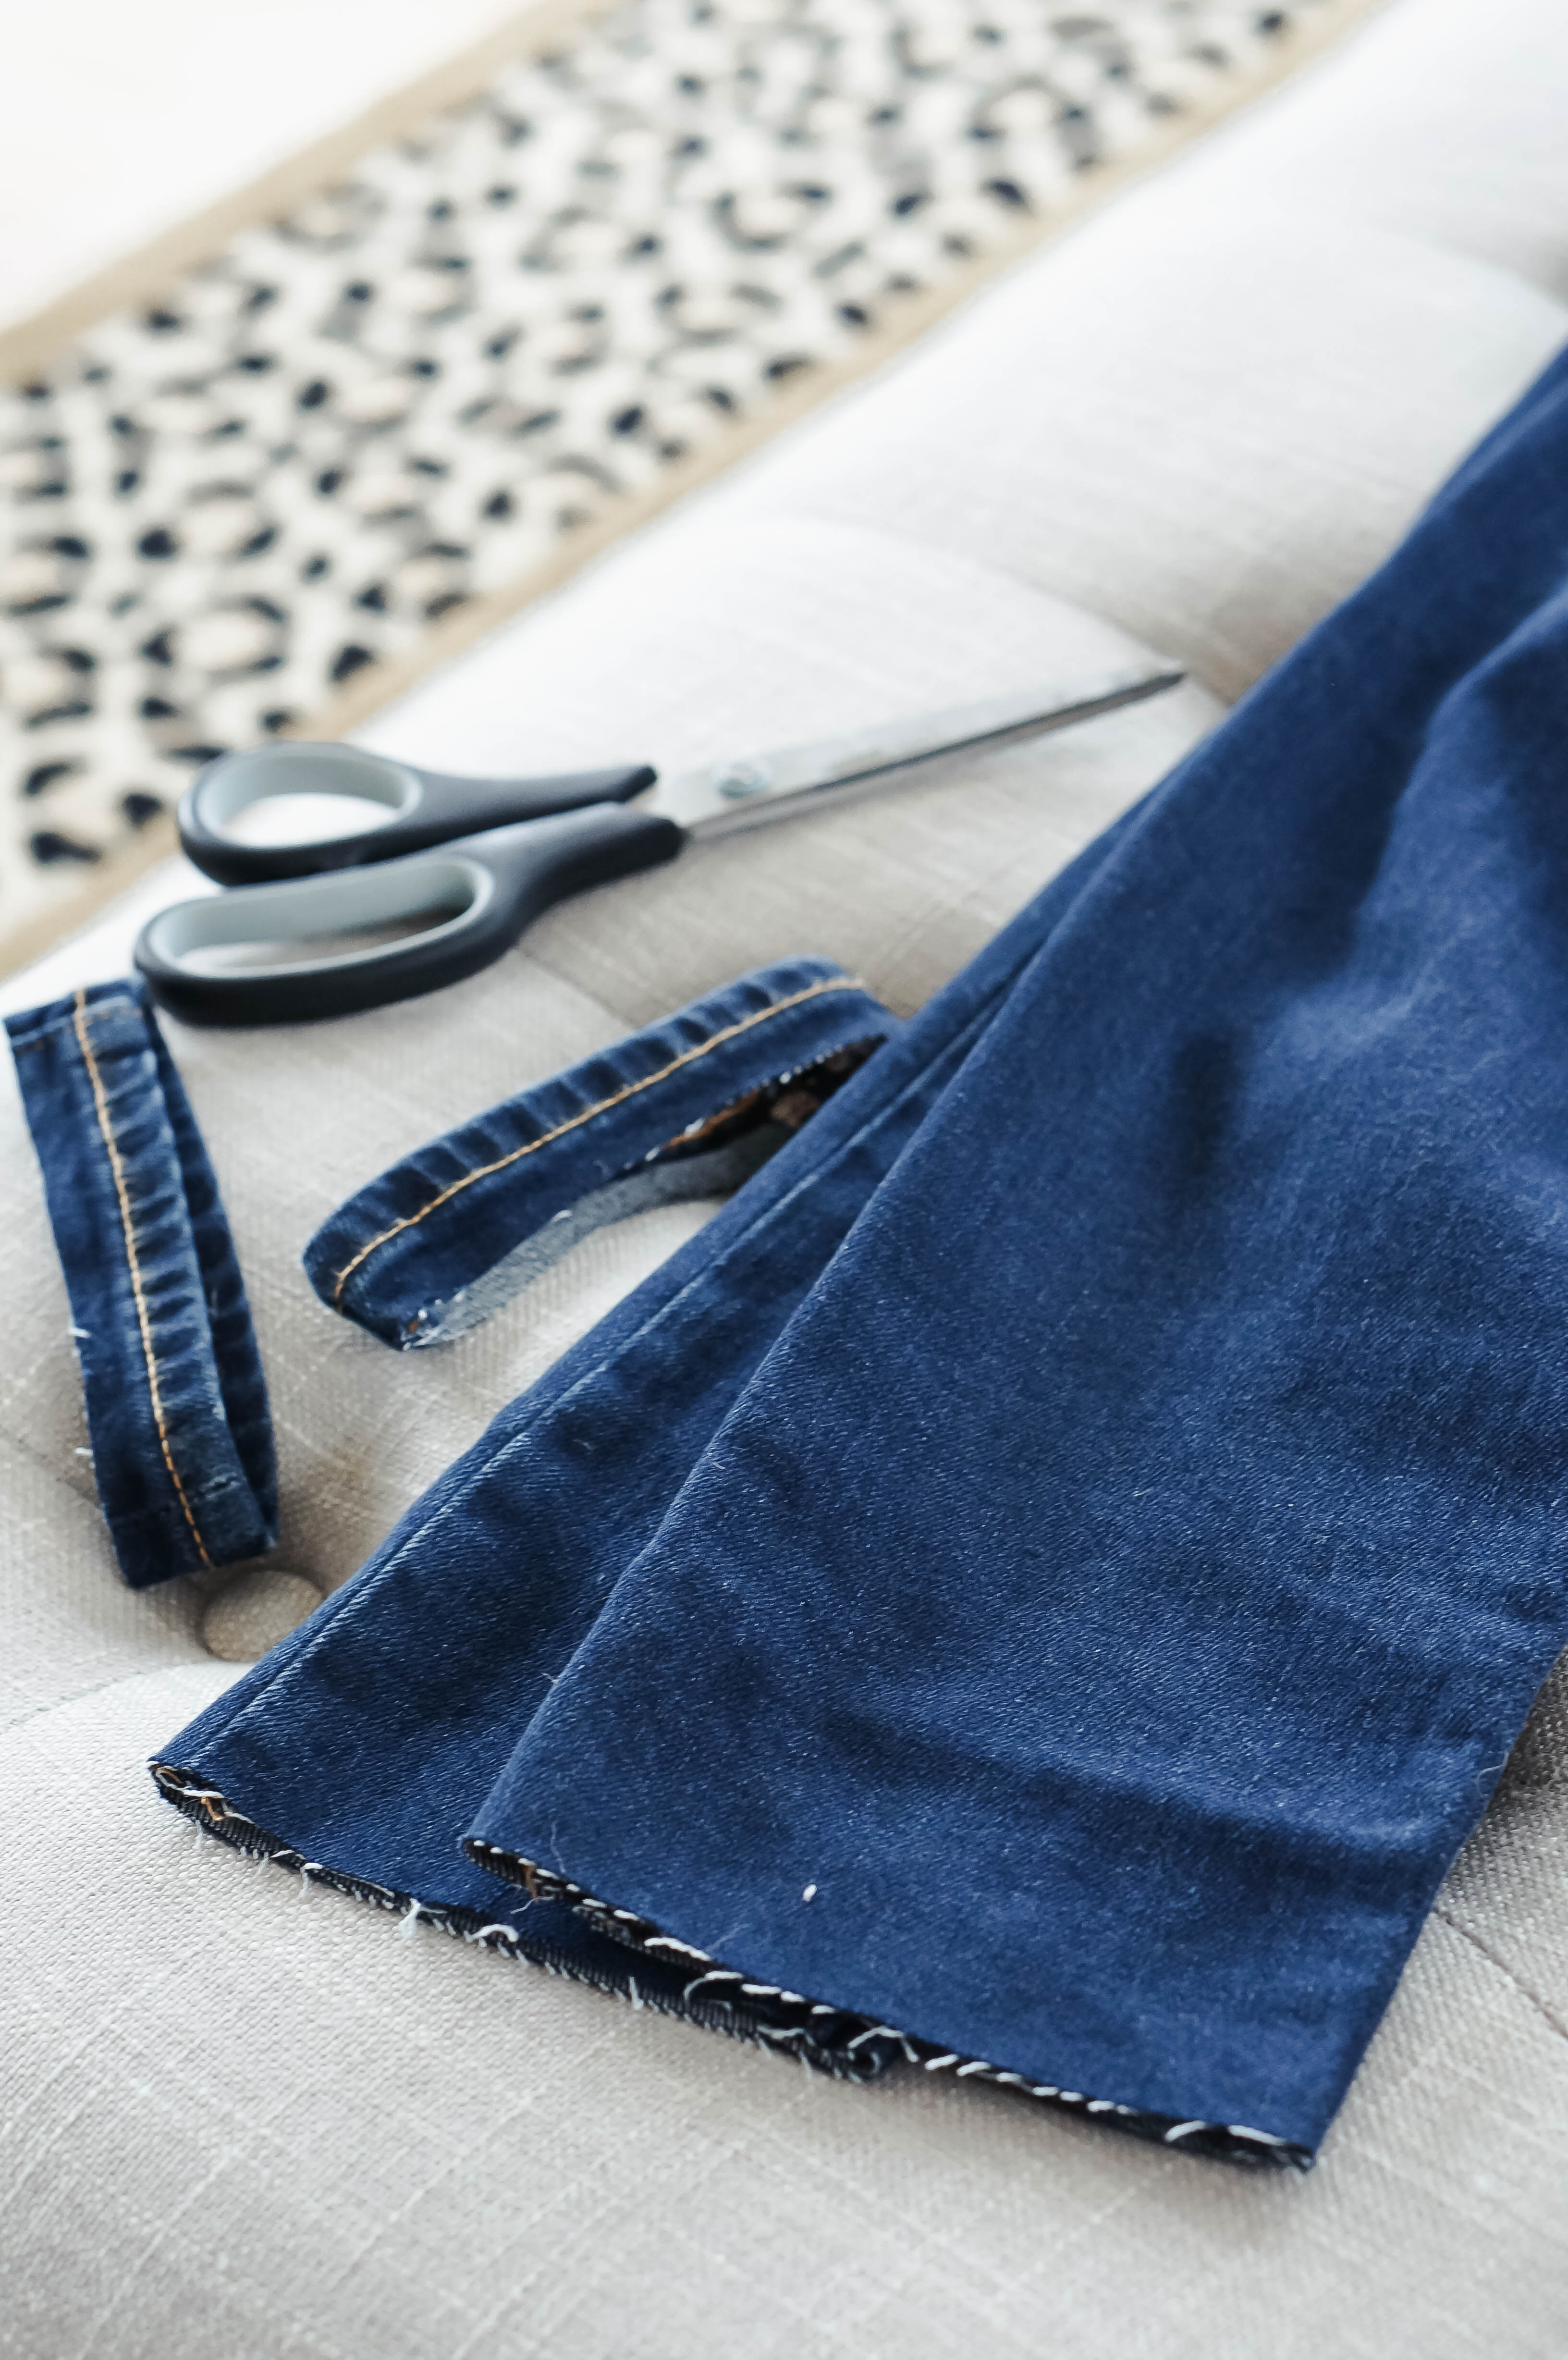 How to Cut the Hem Off Your Denim